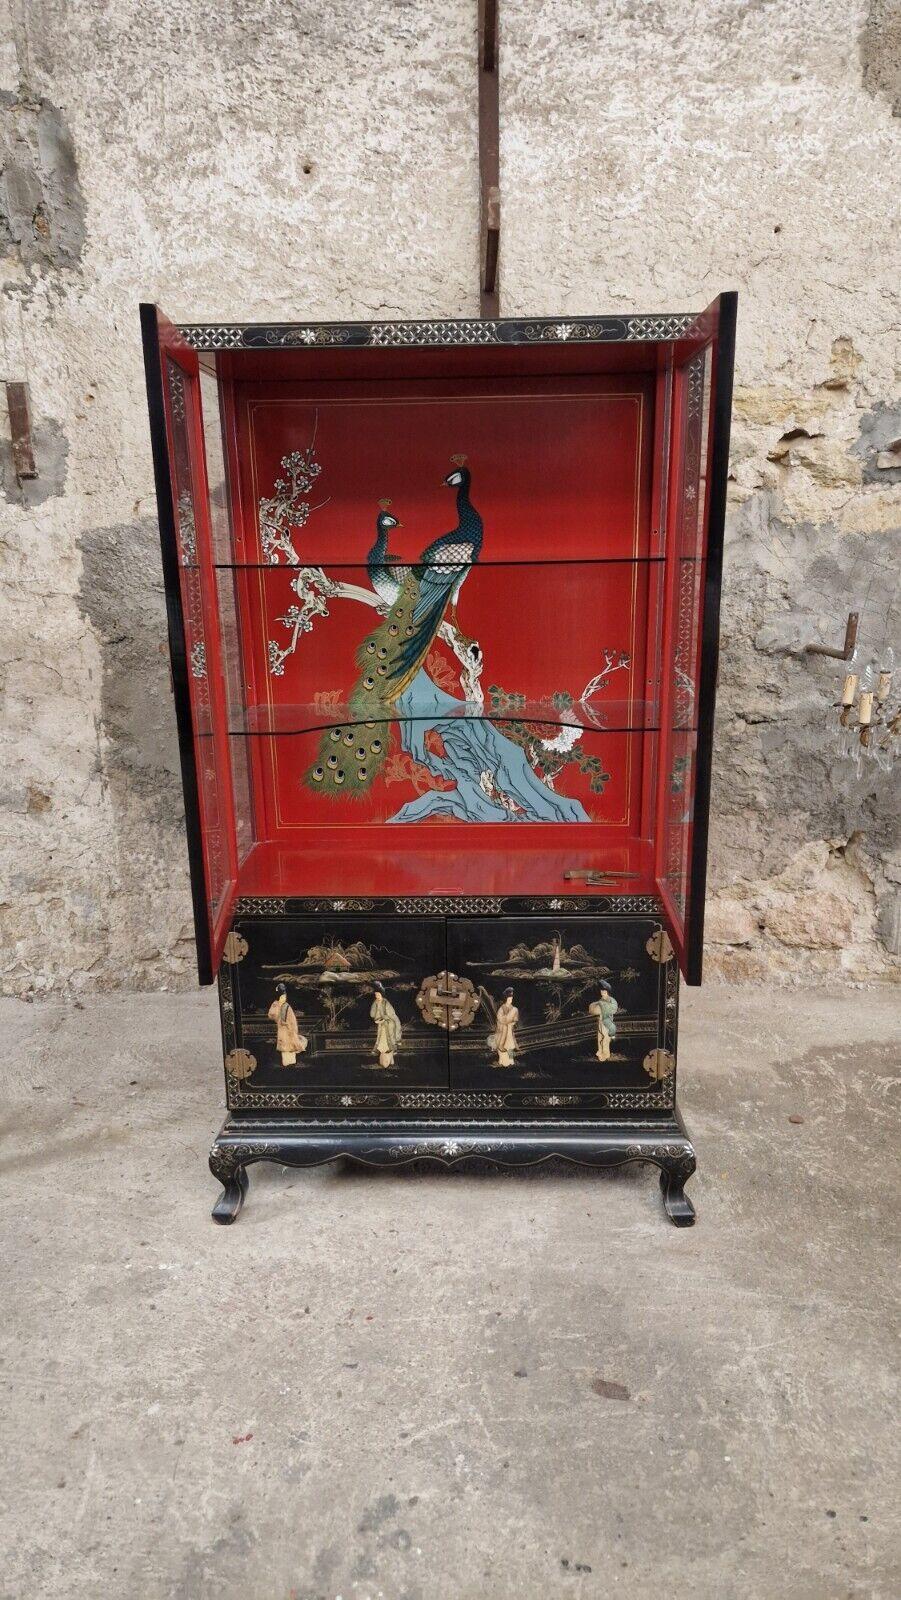 Fabulous Chinoiserie cabinet

Black Lacquered wood
Mother of Pearl Geometric patterns & oriental figures
Red Lacquer to back Panel

Hand painted Peacocks
Brass handles & original padlocks

Glass shelves above

Cupboard below with wooden